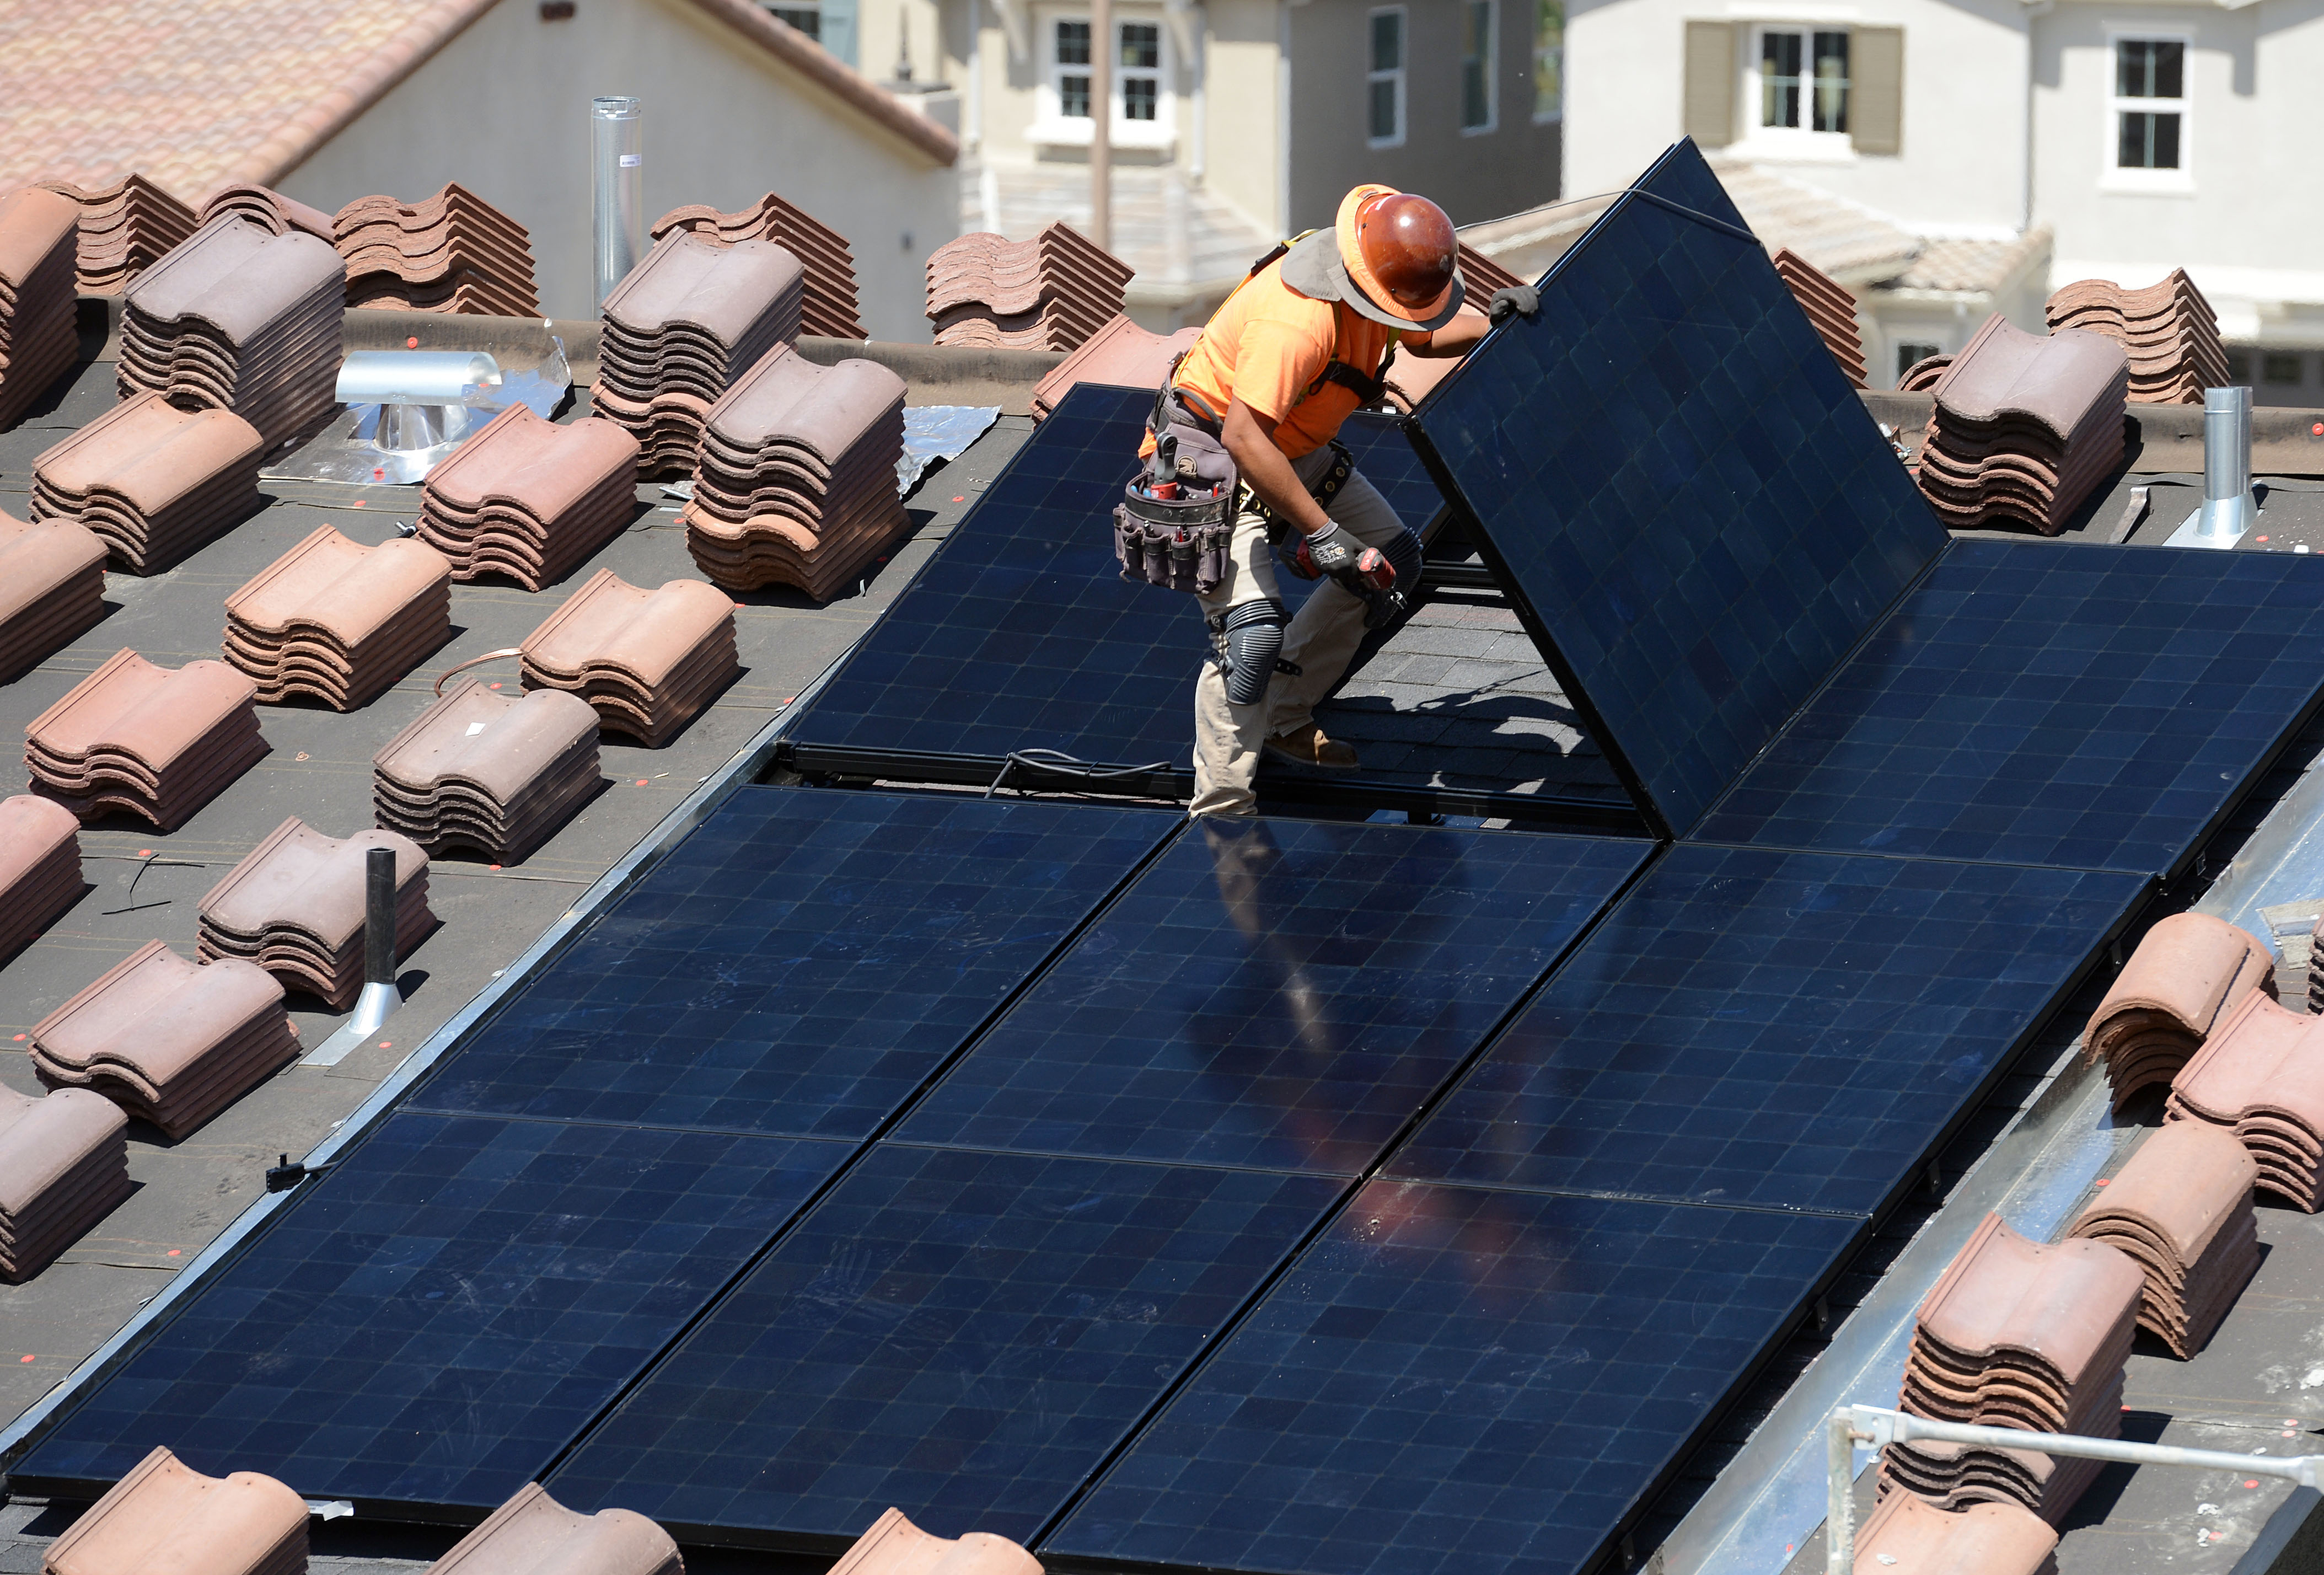 Workers install solar panels on the roofs of homes under construction in California.